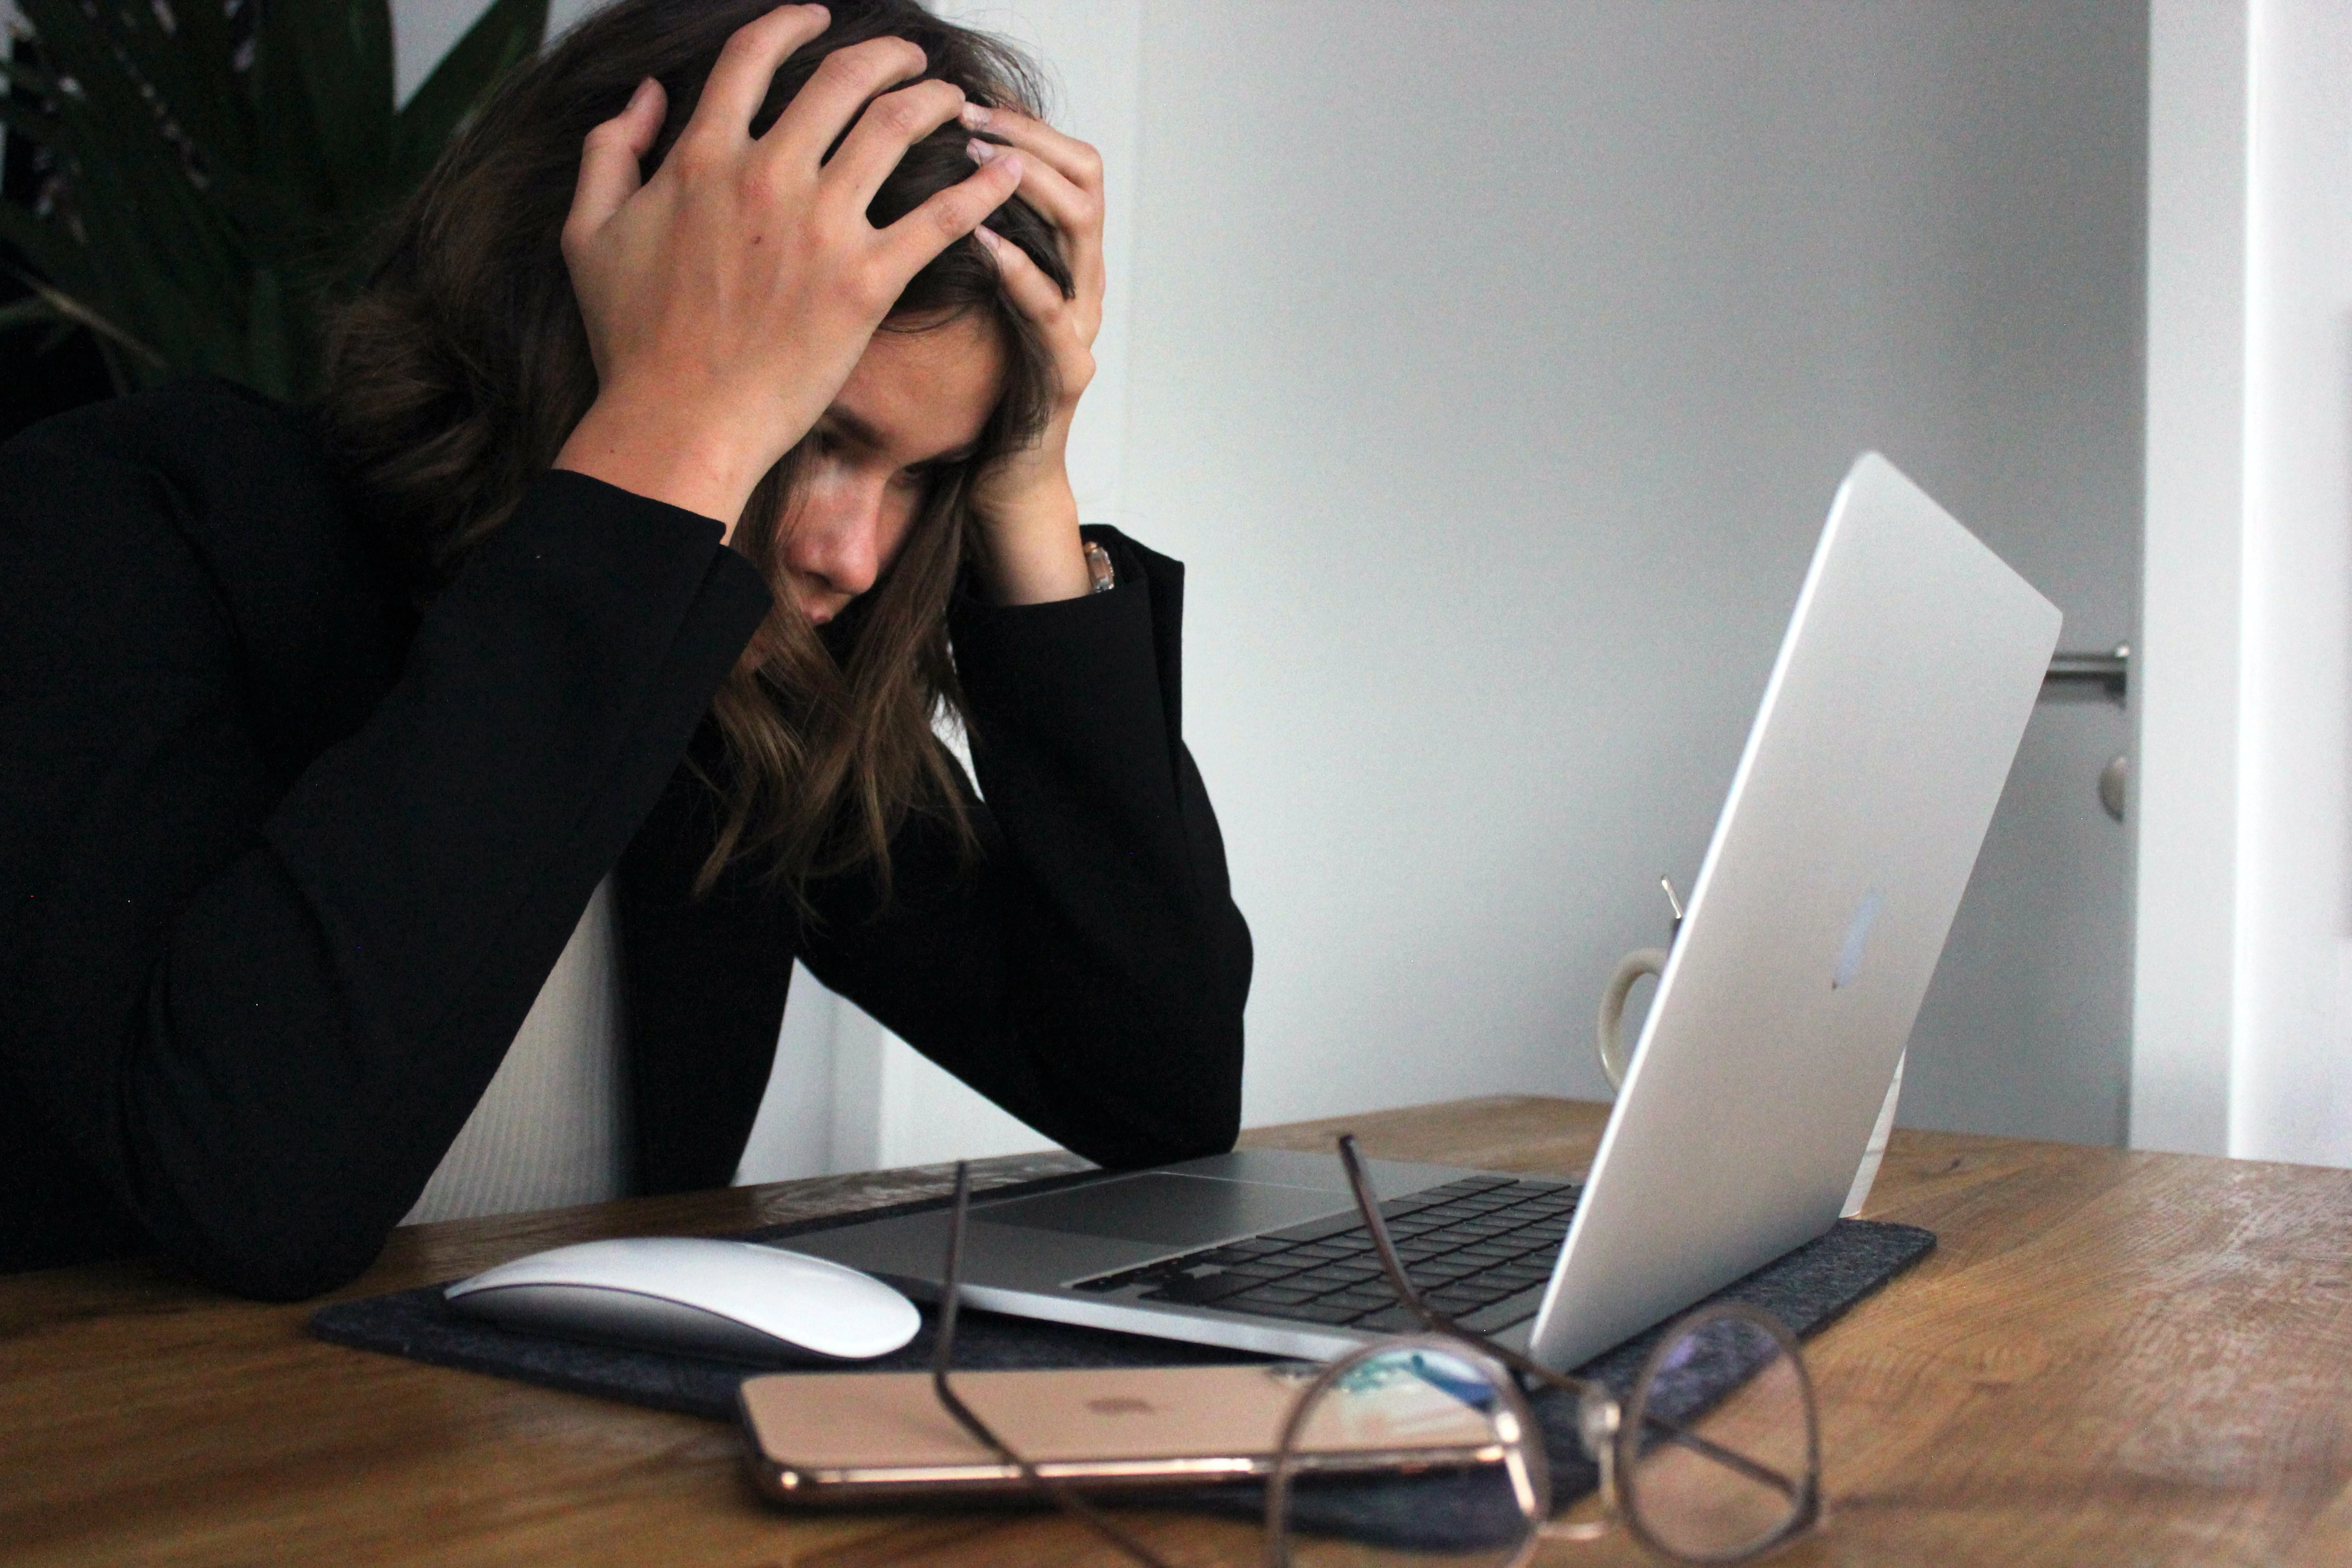 More than half of marketers more stressed than last year